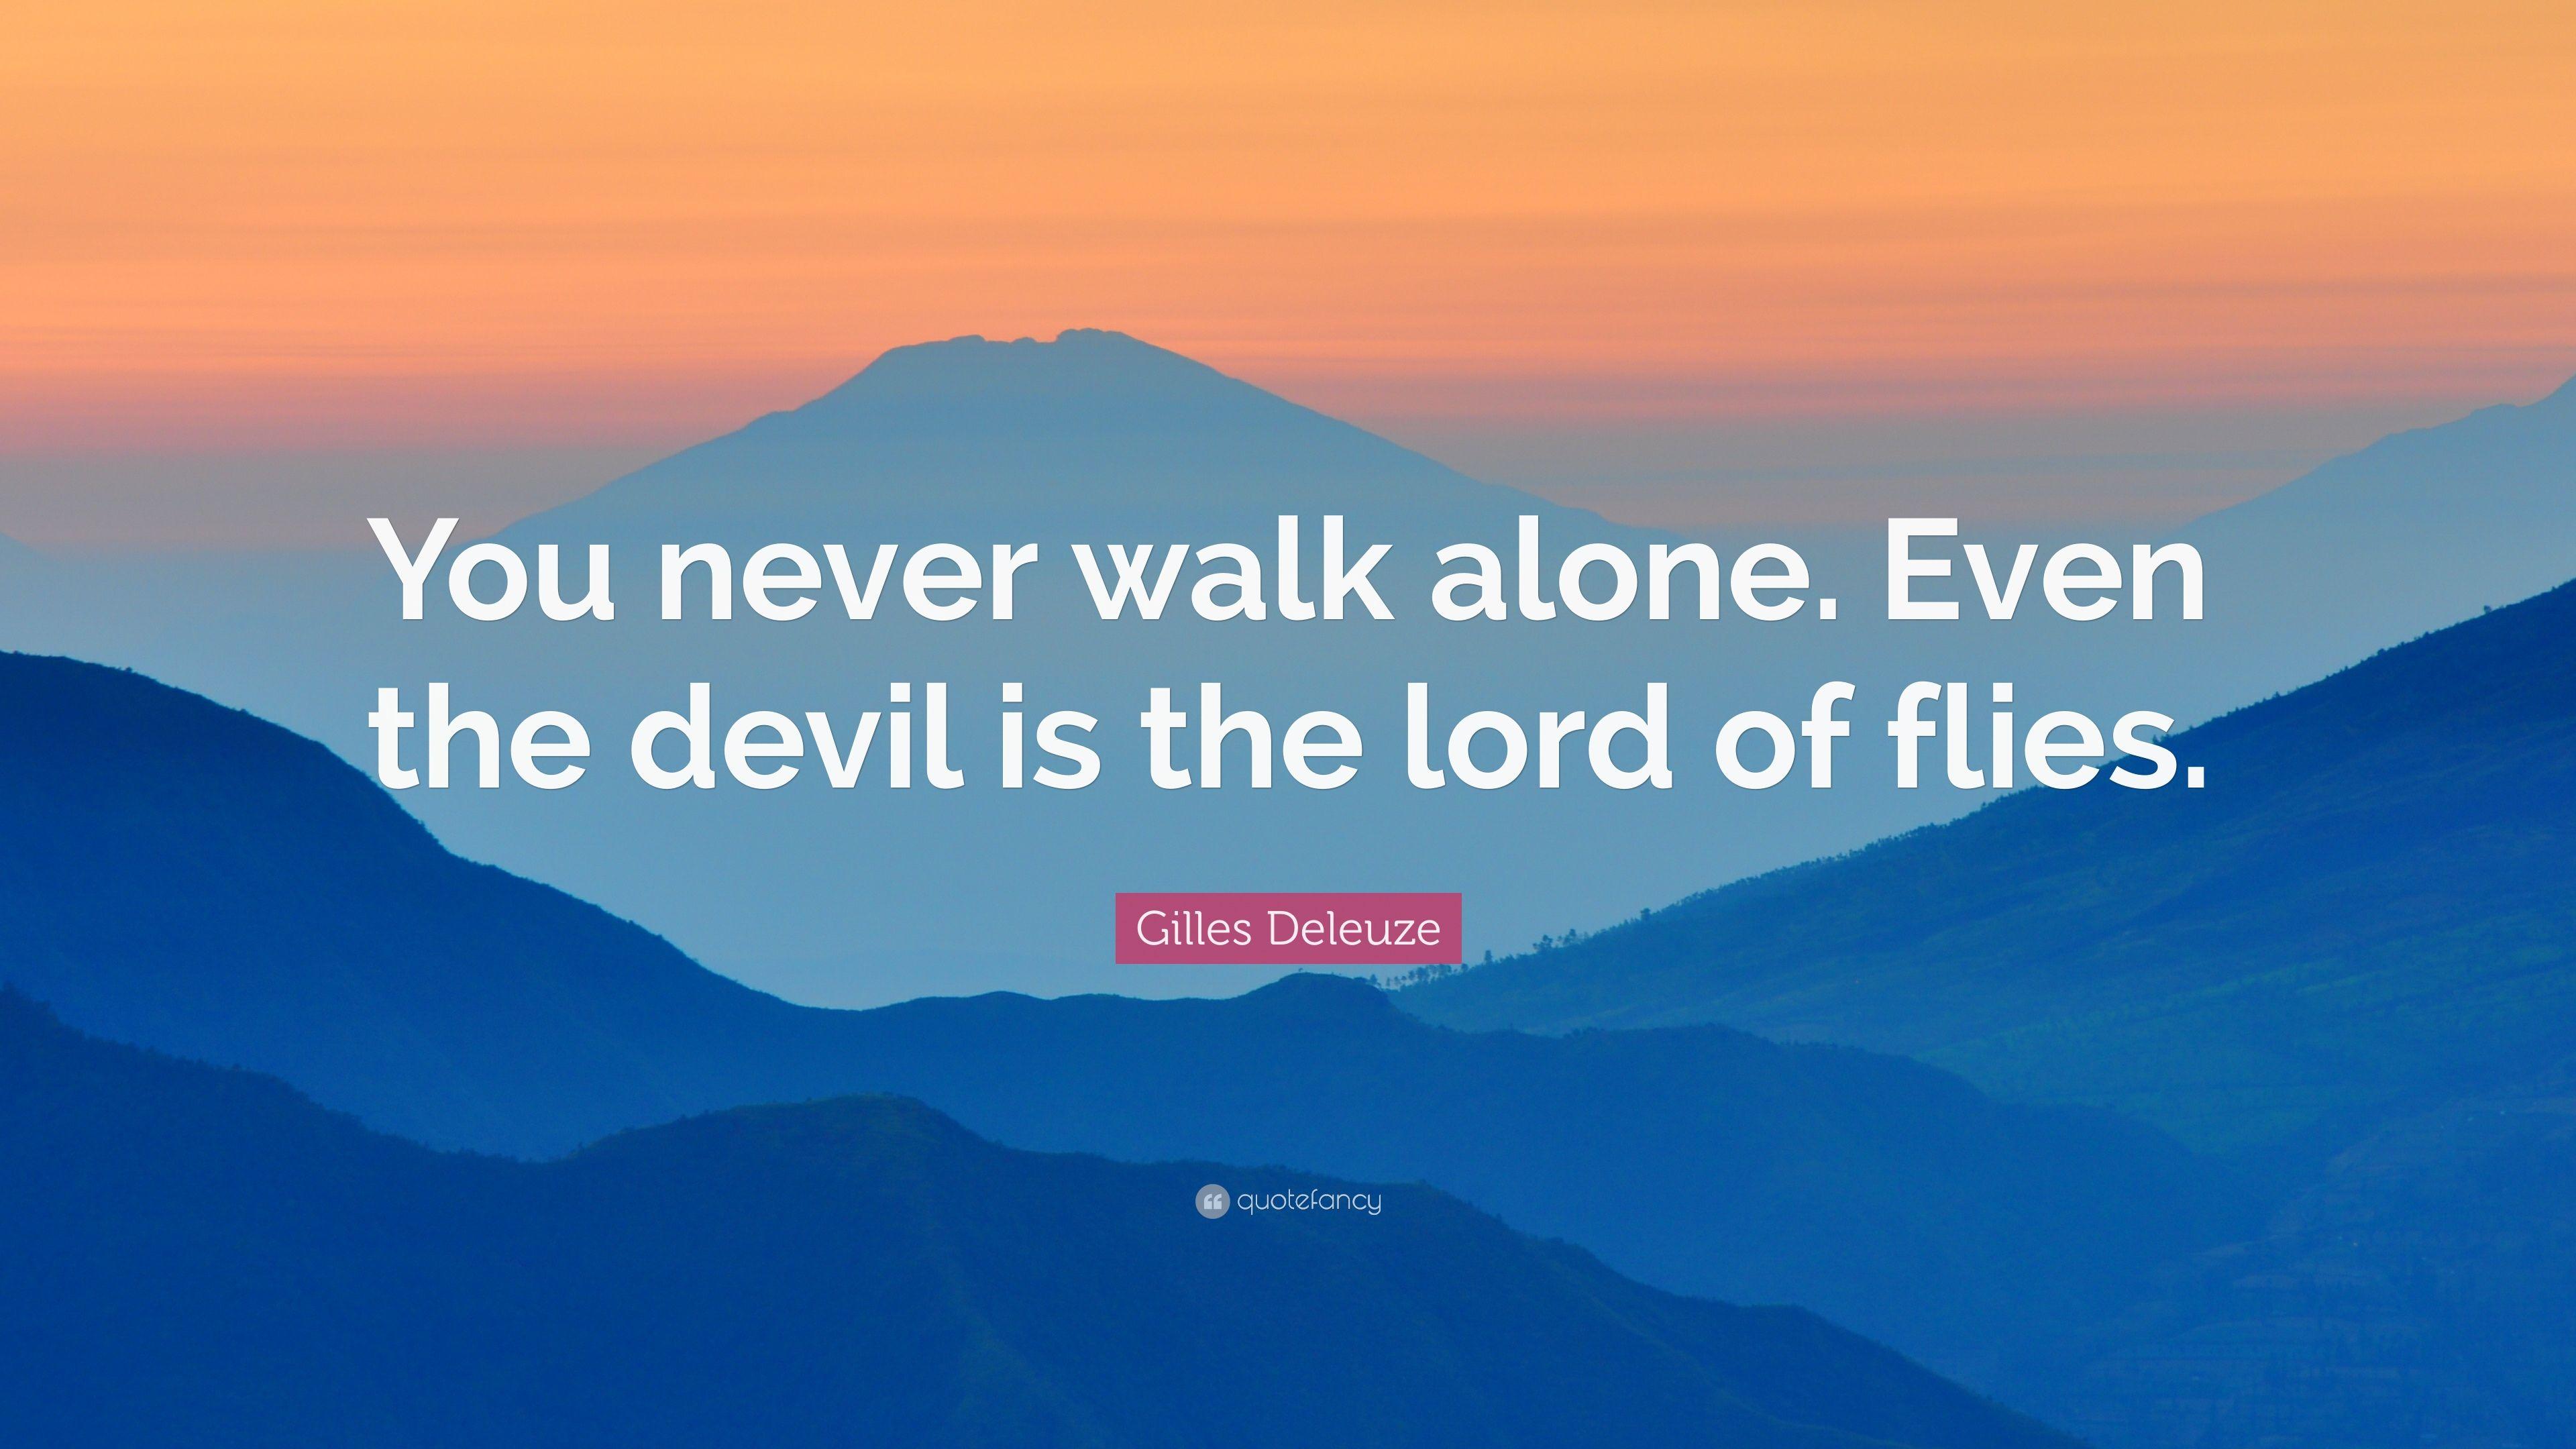 Gilles Deleuze Quote: “You never walk alone. Even the devil is